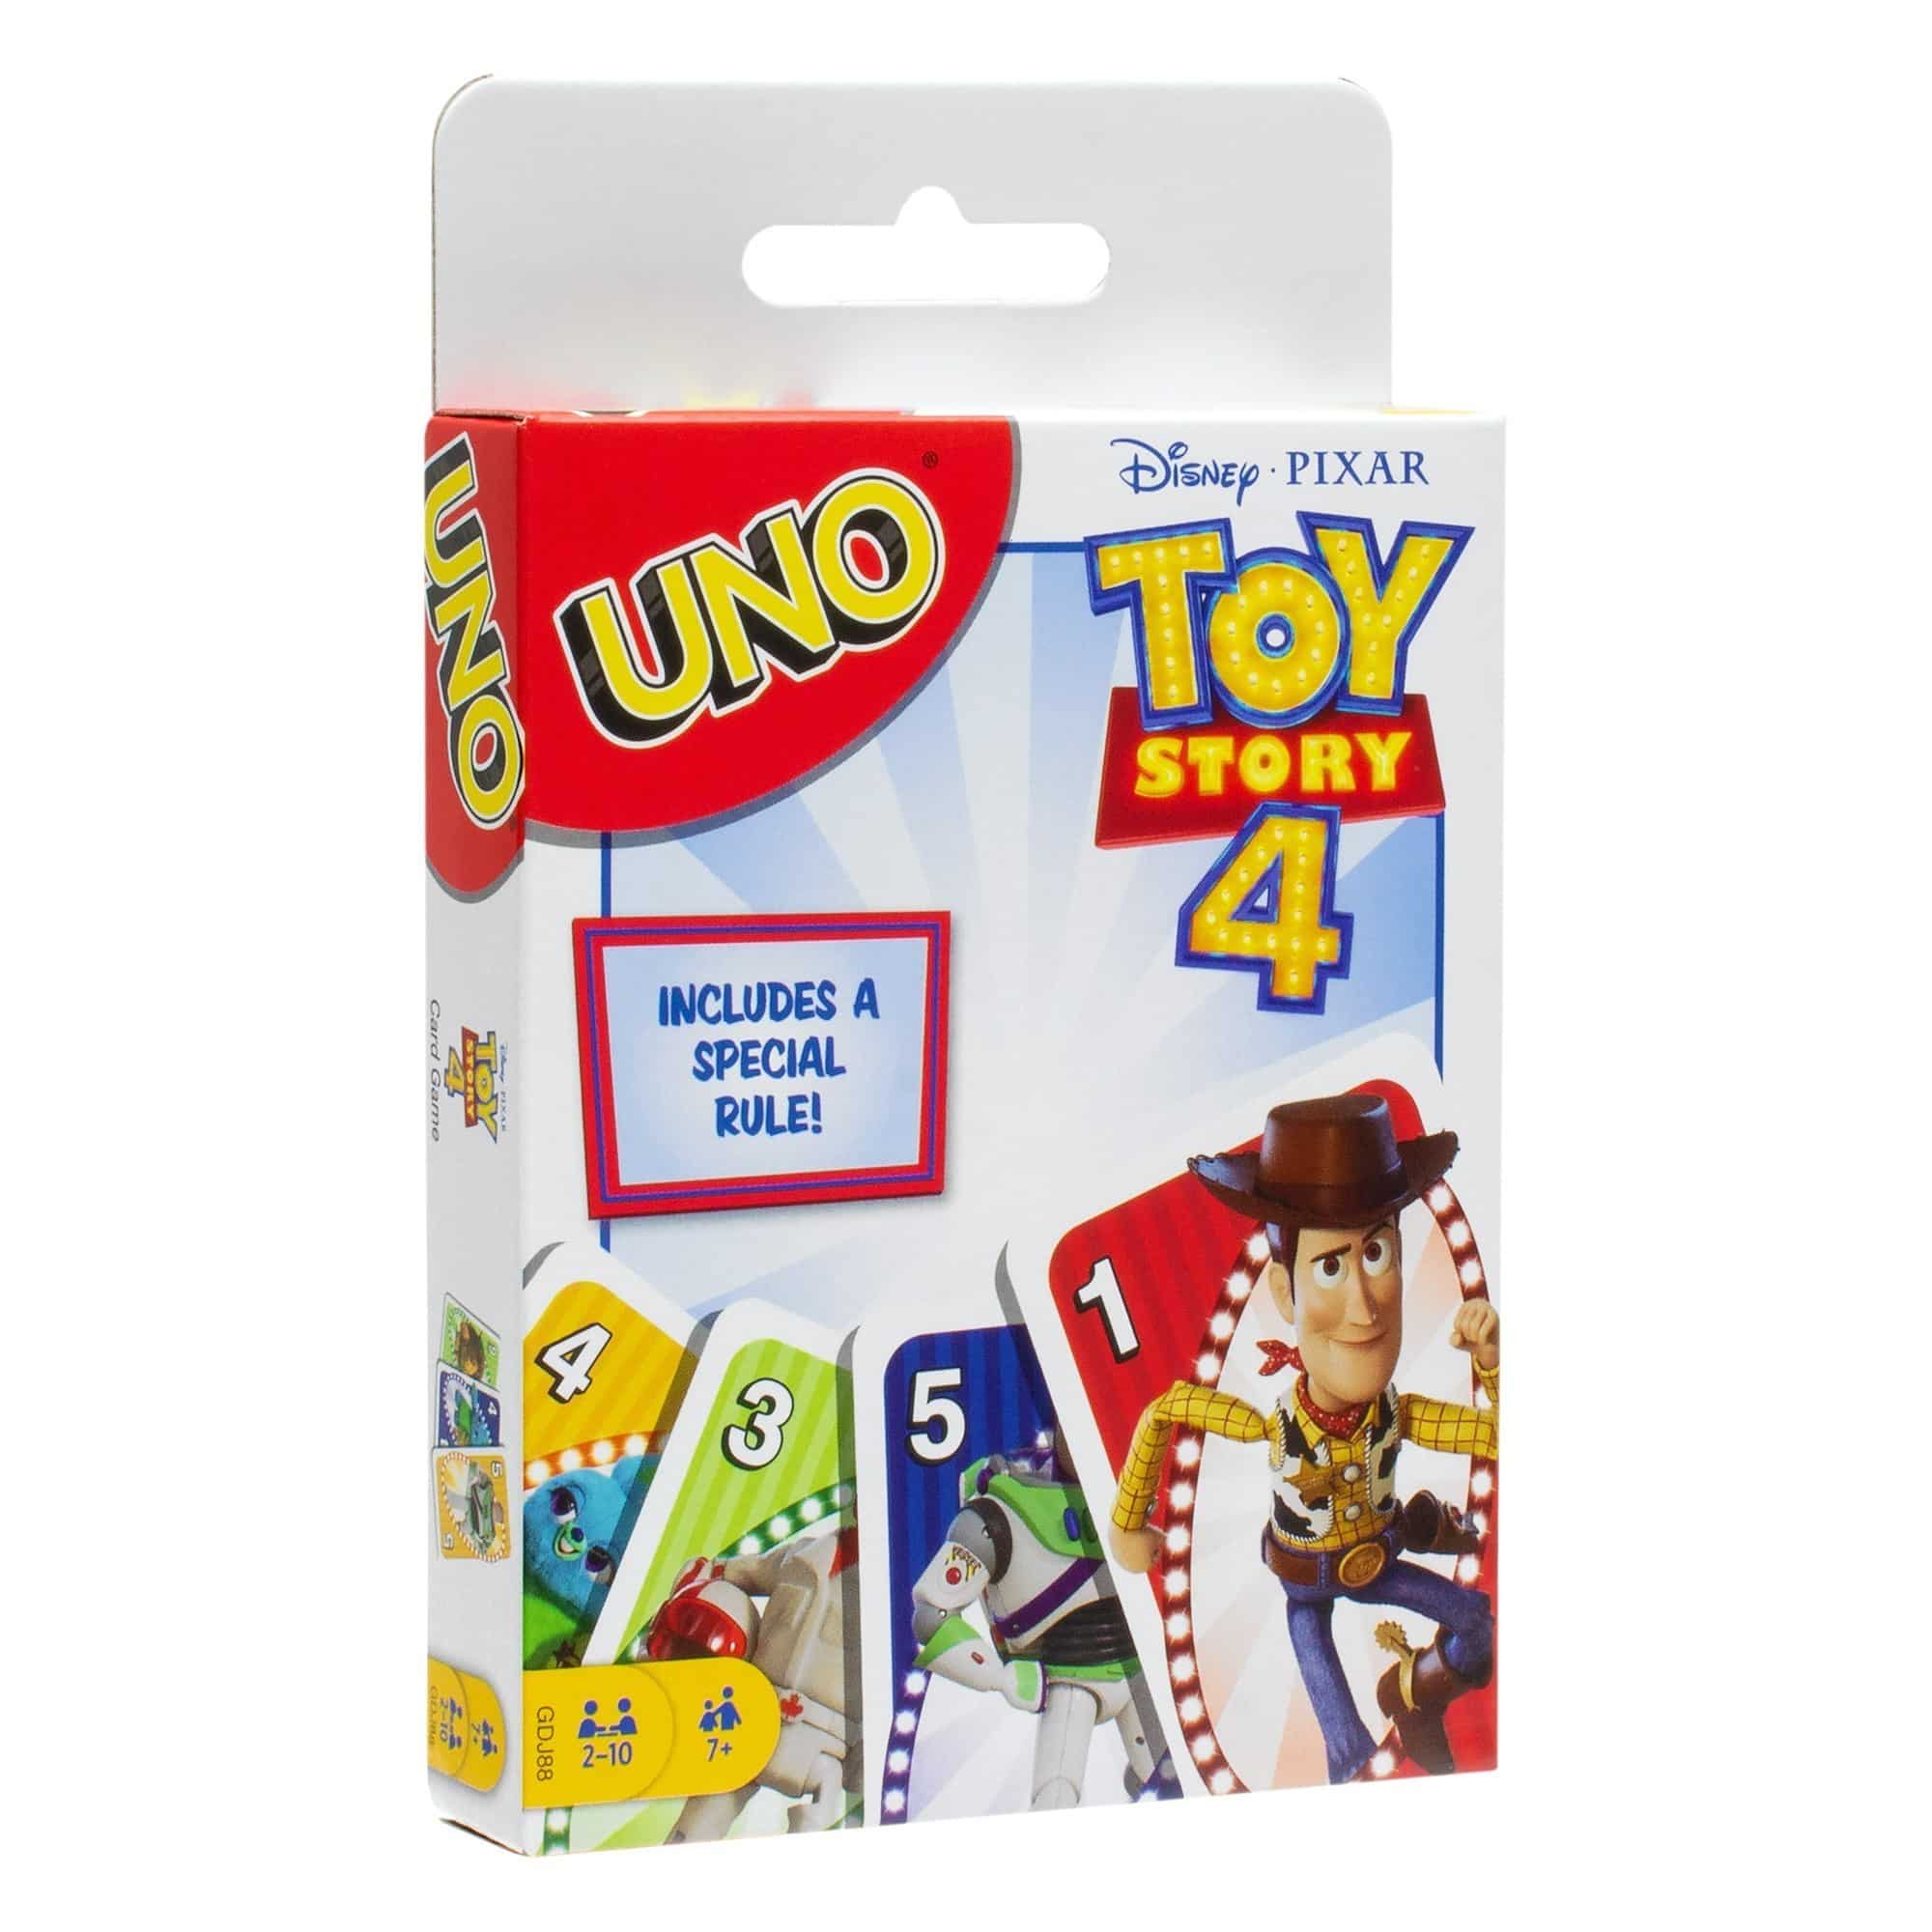 Toy Story 4 - UNO Card Game